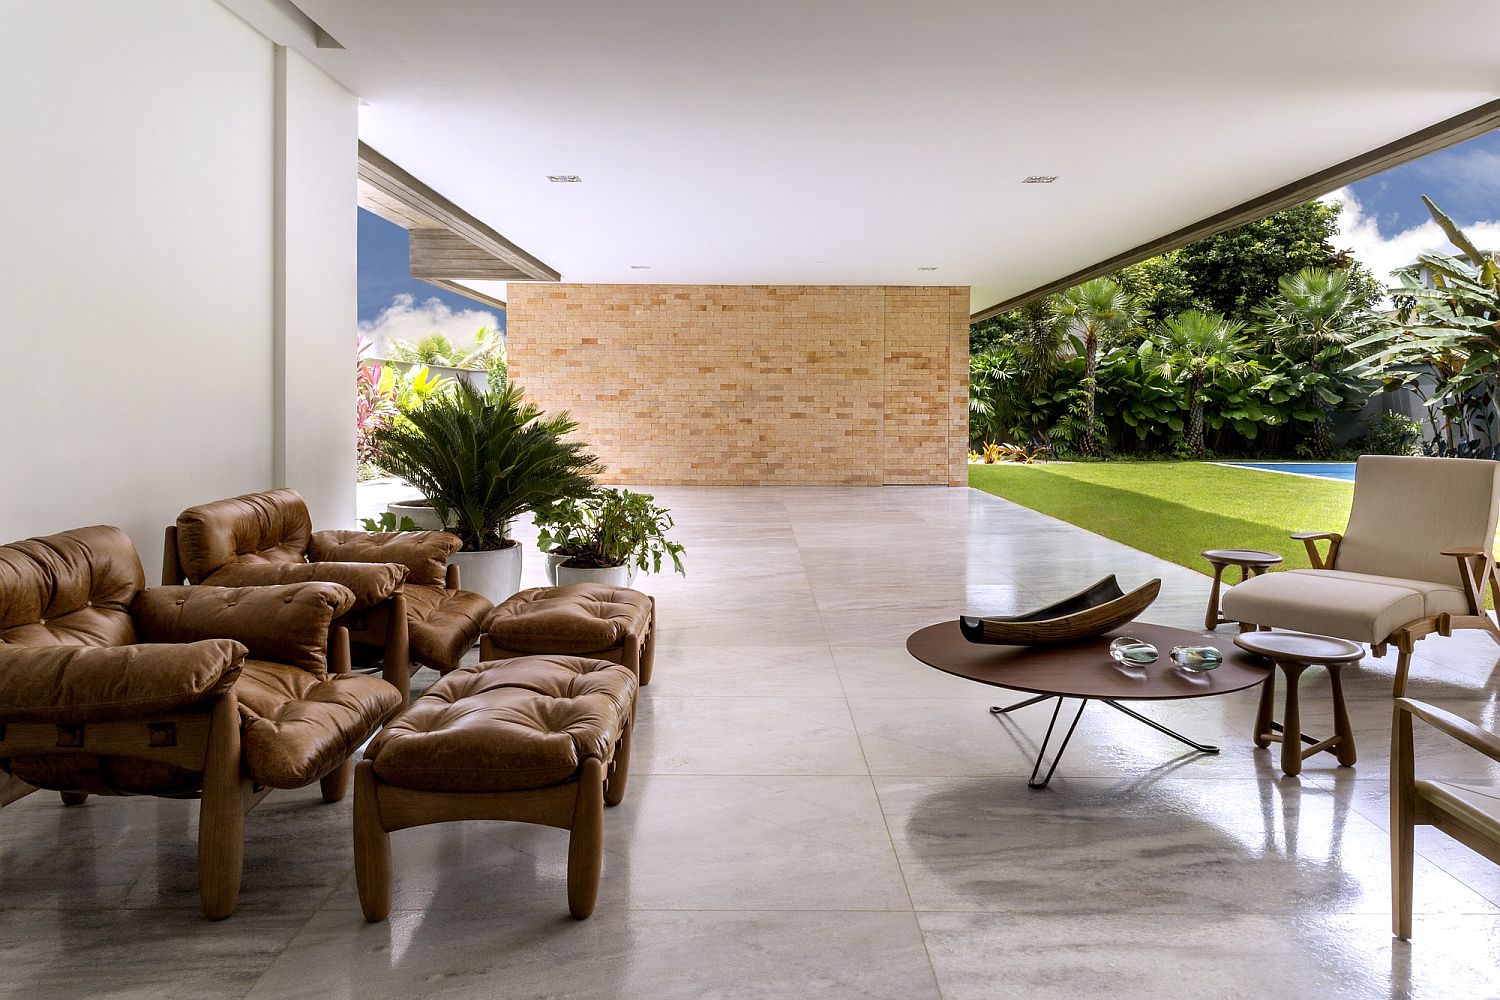 Open-style living area next to the pool brings the outdoors inside